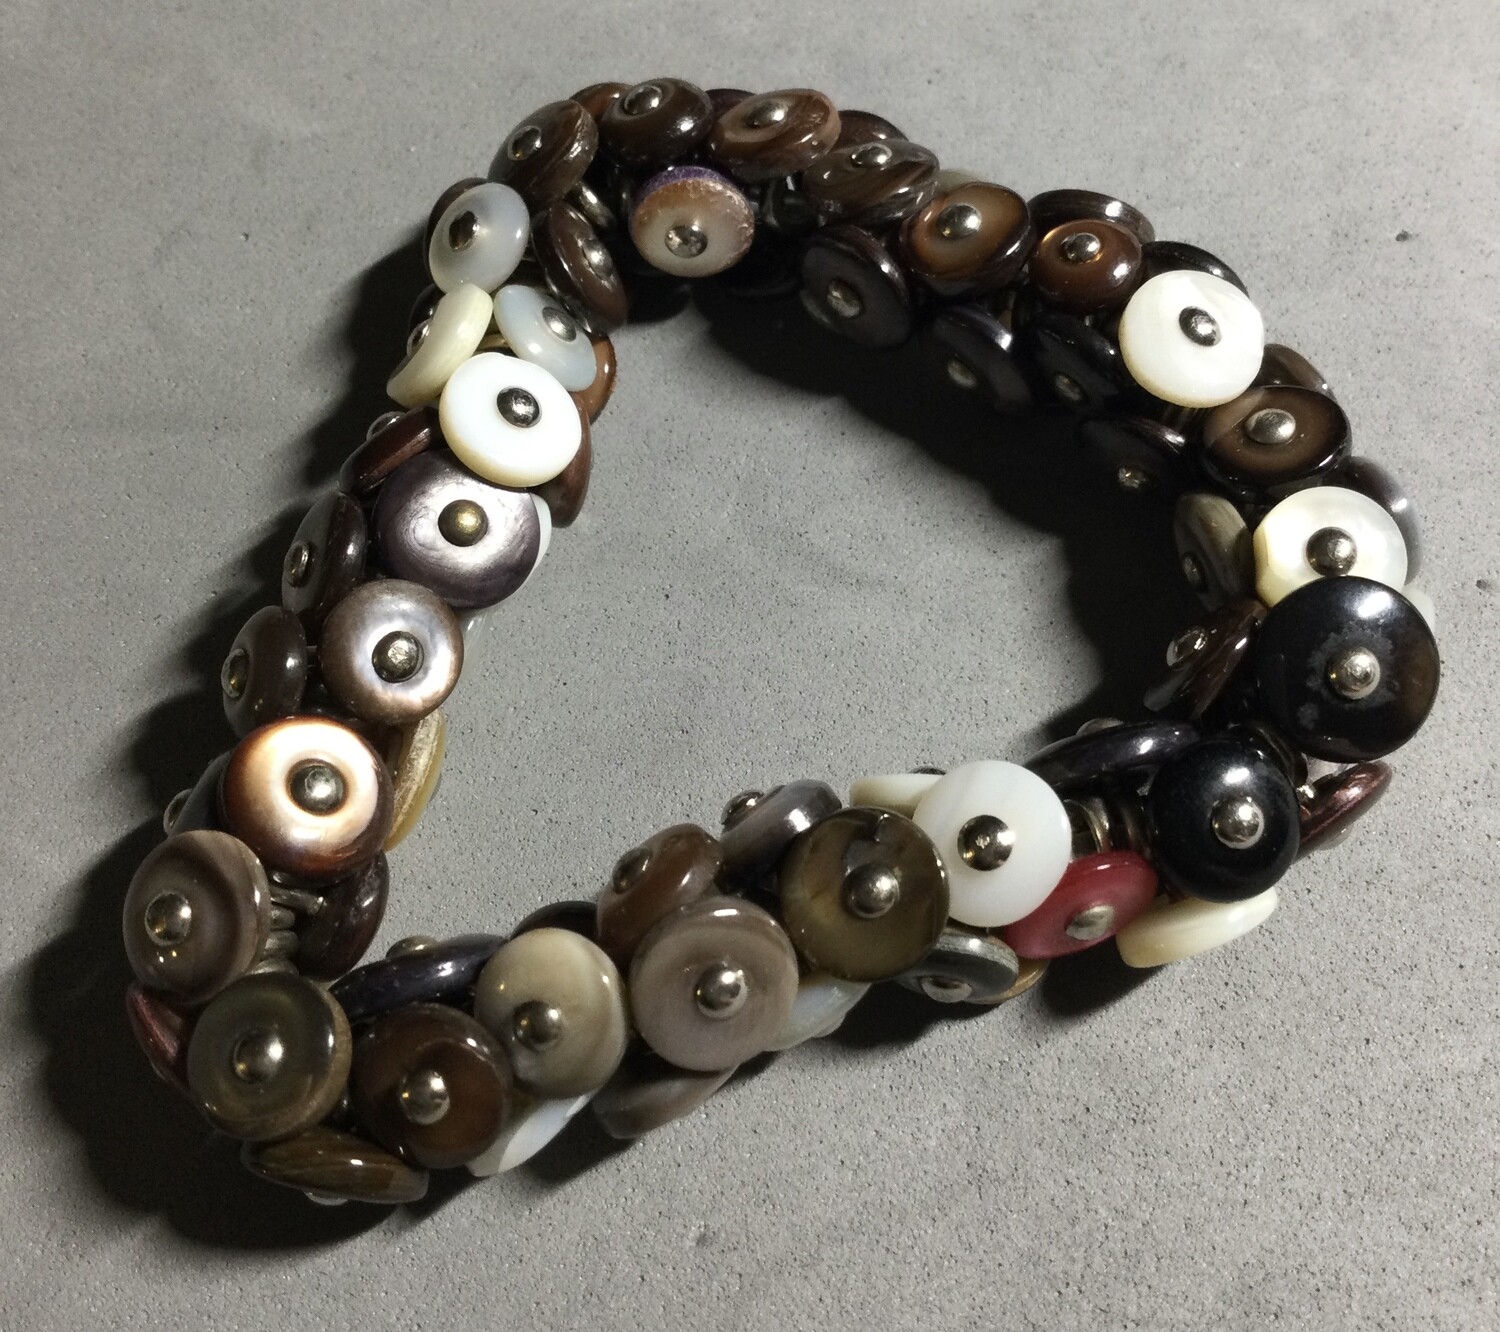 MULTI-COLORED BOOT BUTTONS STRETCHY BRACELET